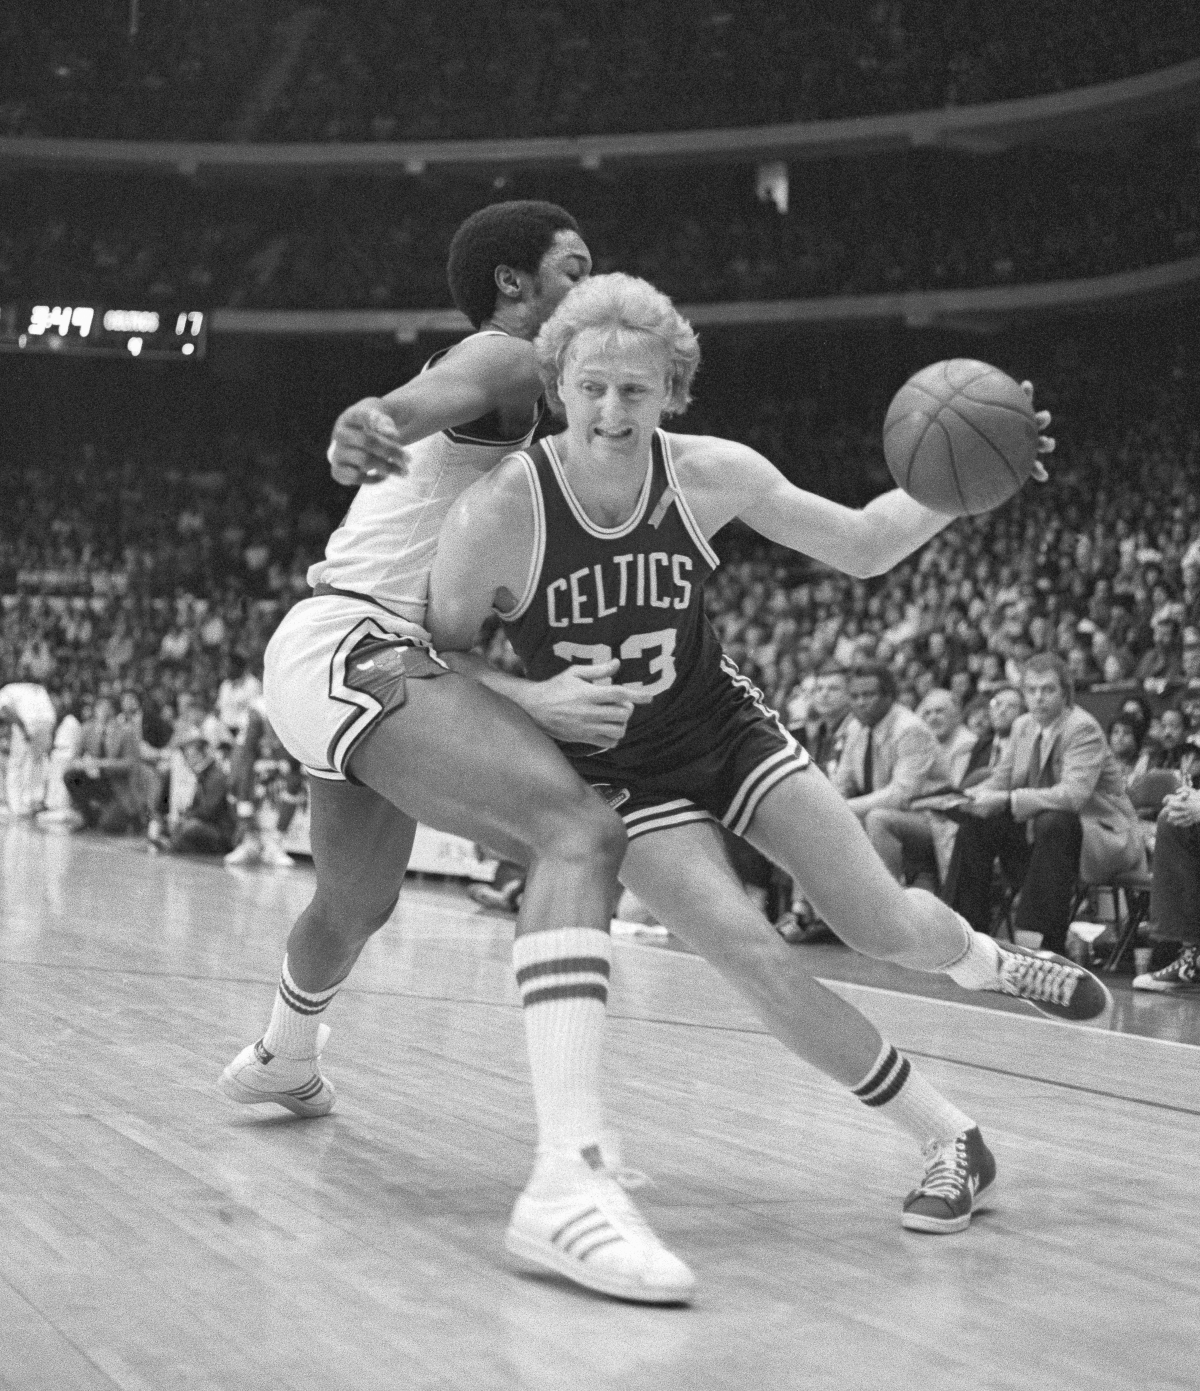 An Opposing Defender Once Compared Larry Bird to a Literal Force of Nature: ‘Trying to Stop Larry Bird Is Like Trying to Stop the Wind’